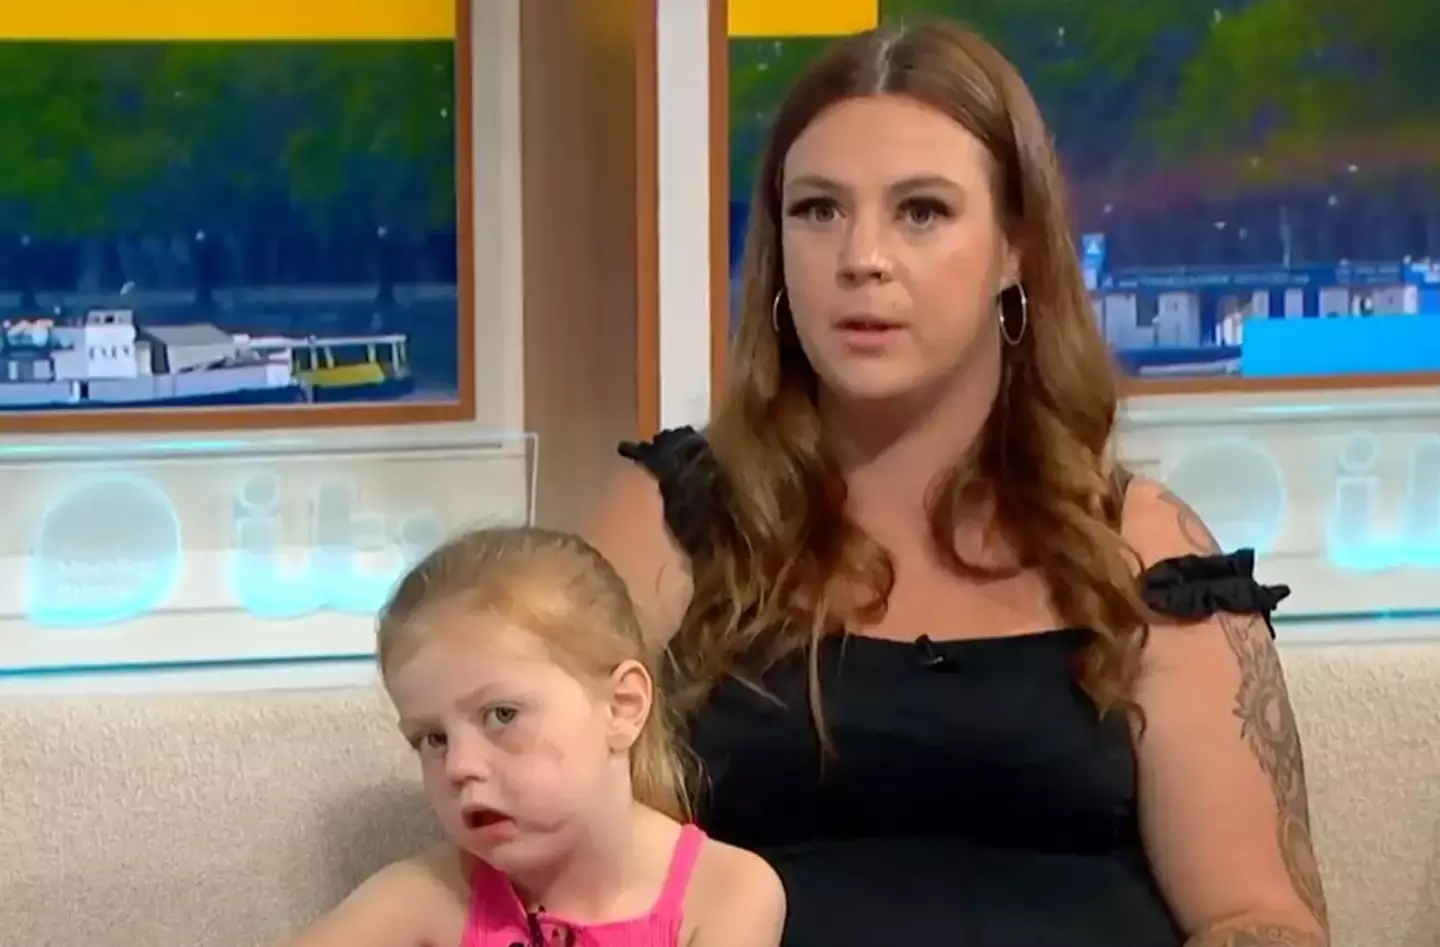 The mother and daughter appeared on Good Morning Britain to recount the ordeal.